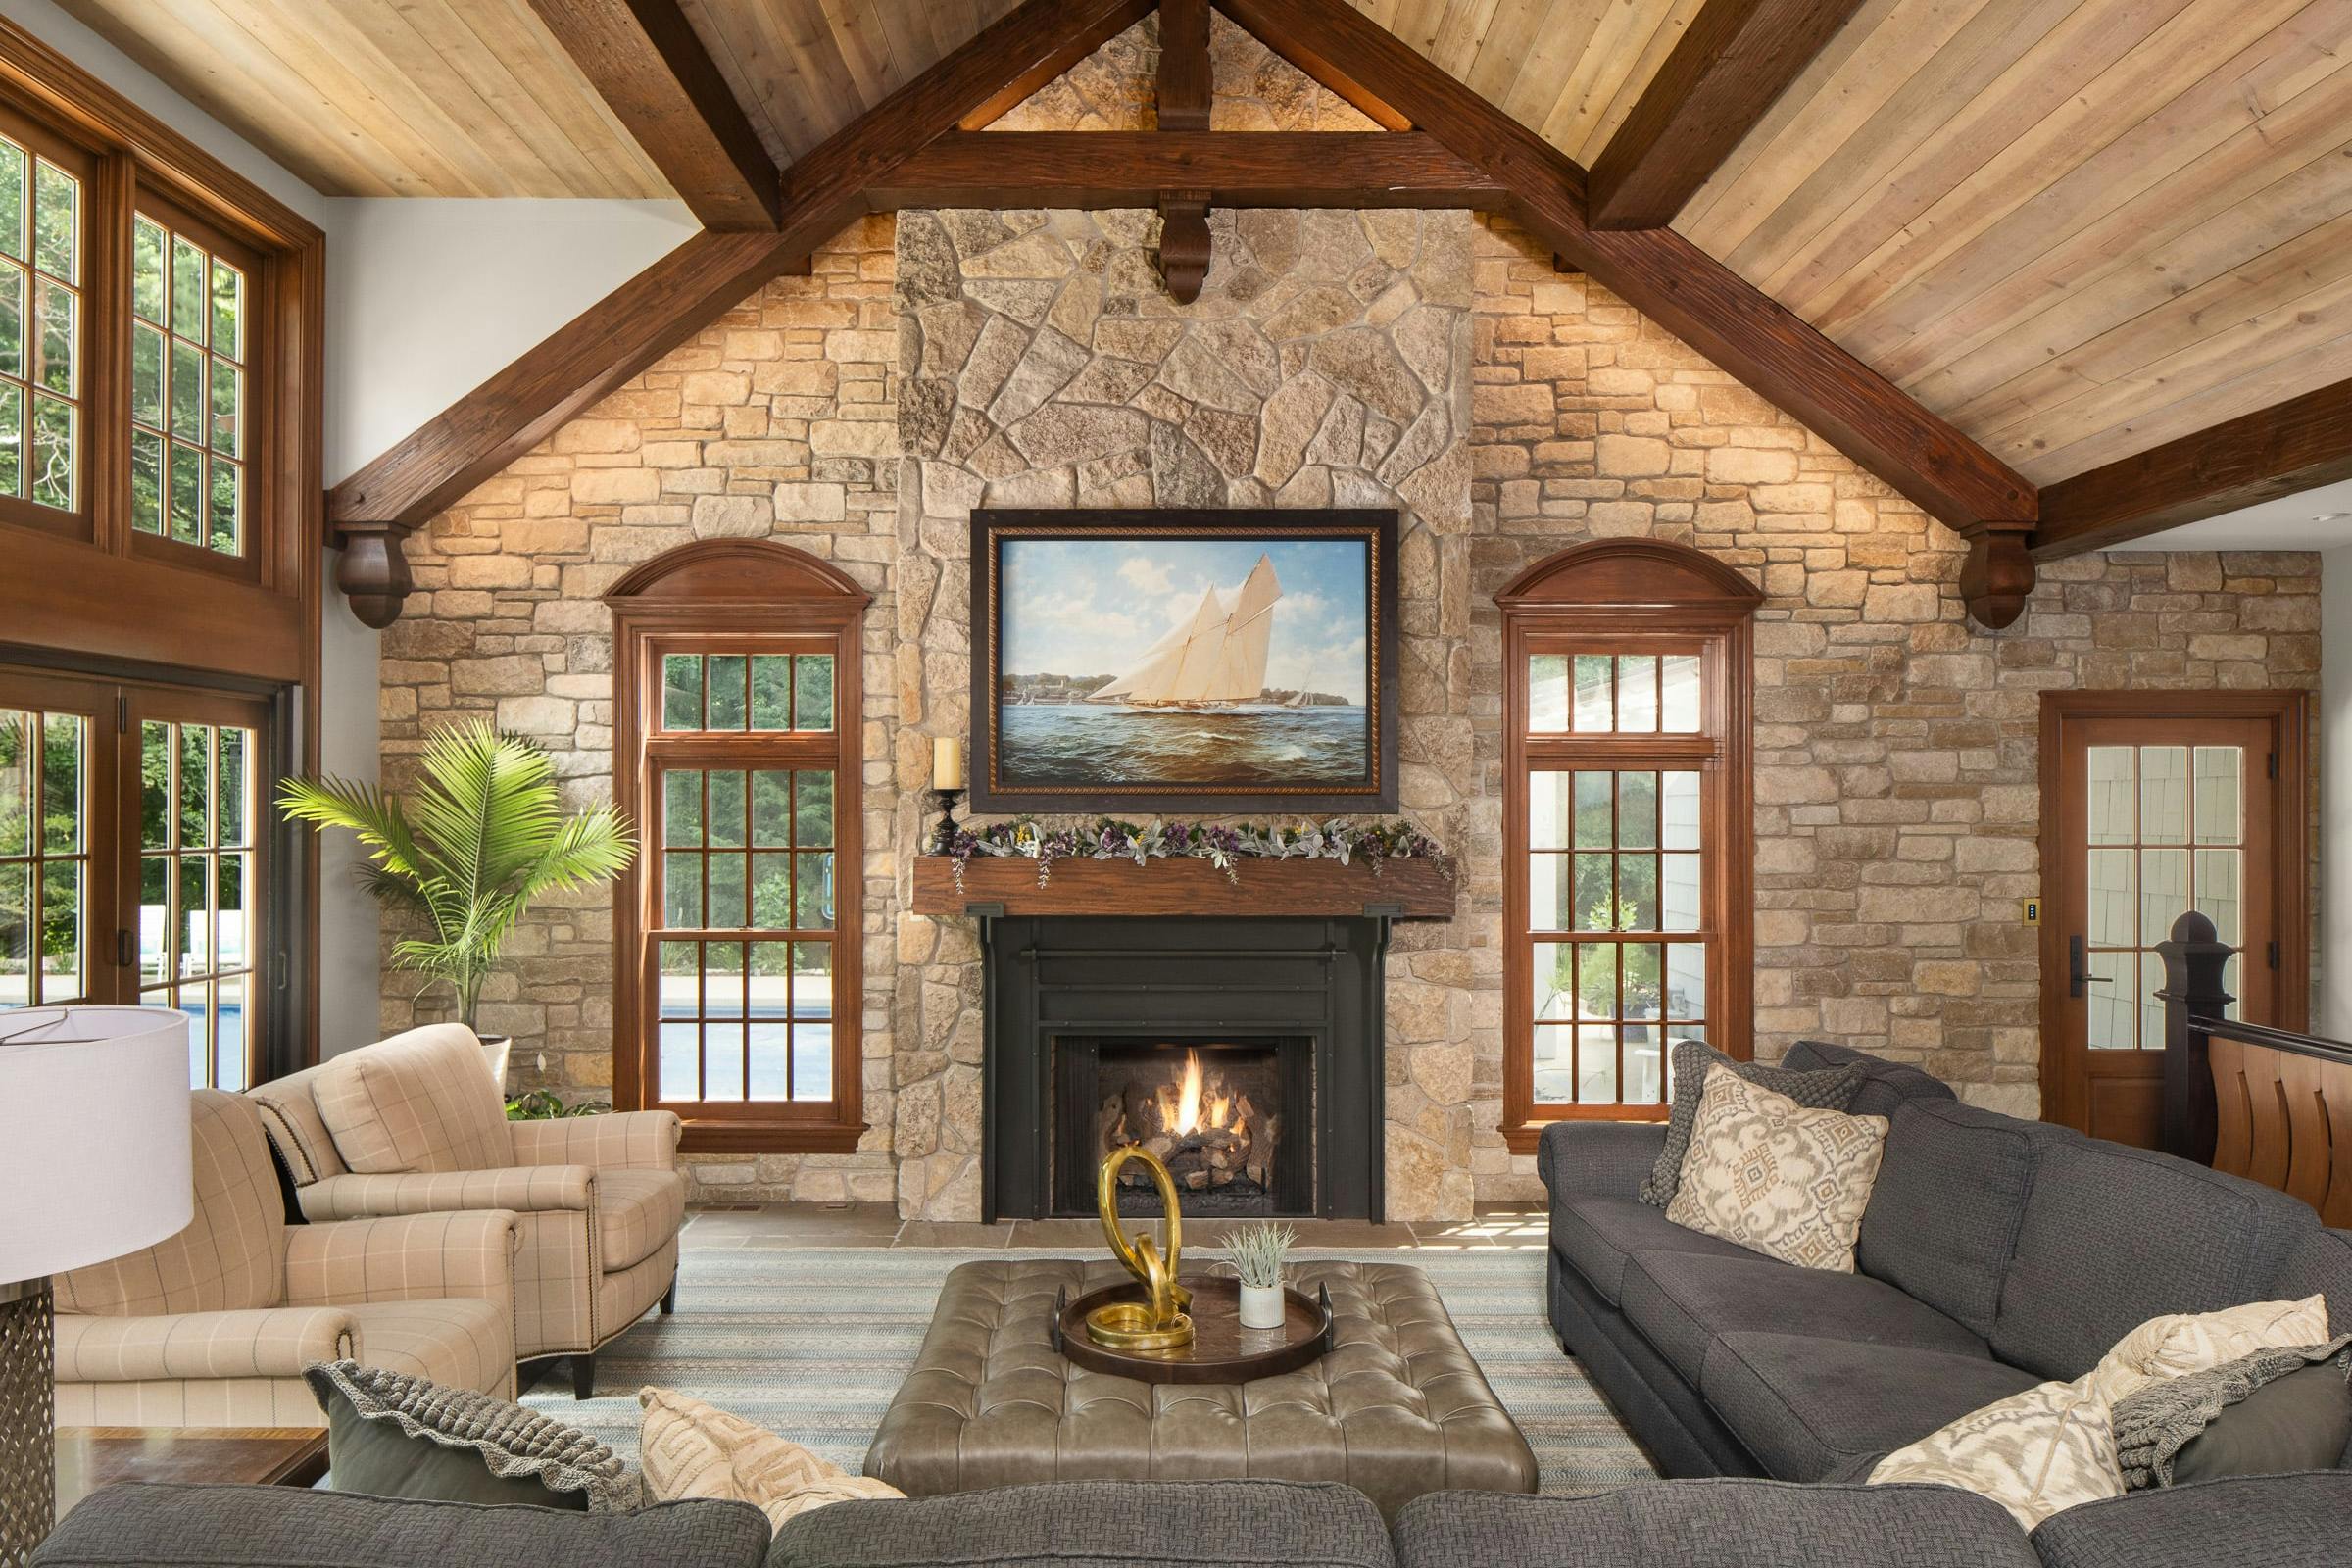 new addition with living room furniture, tall ceiling with beams, stone work, fireplace 